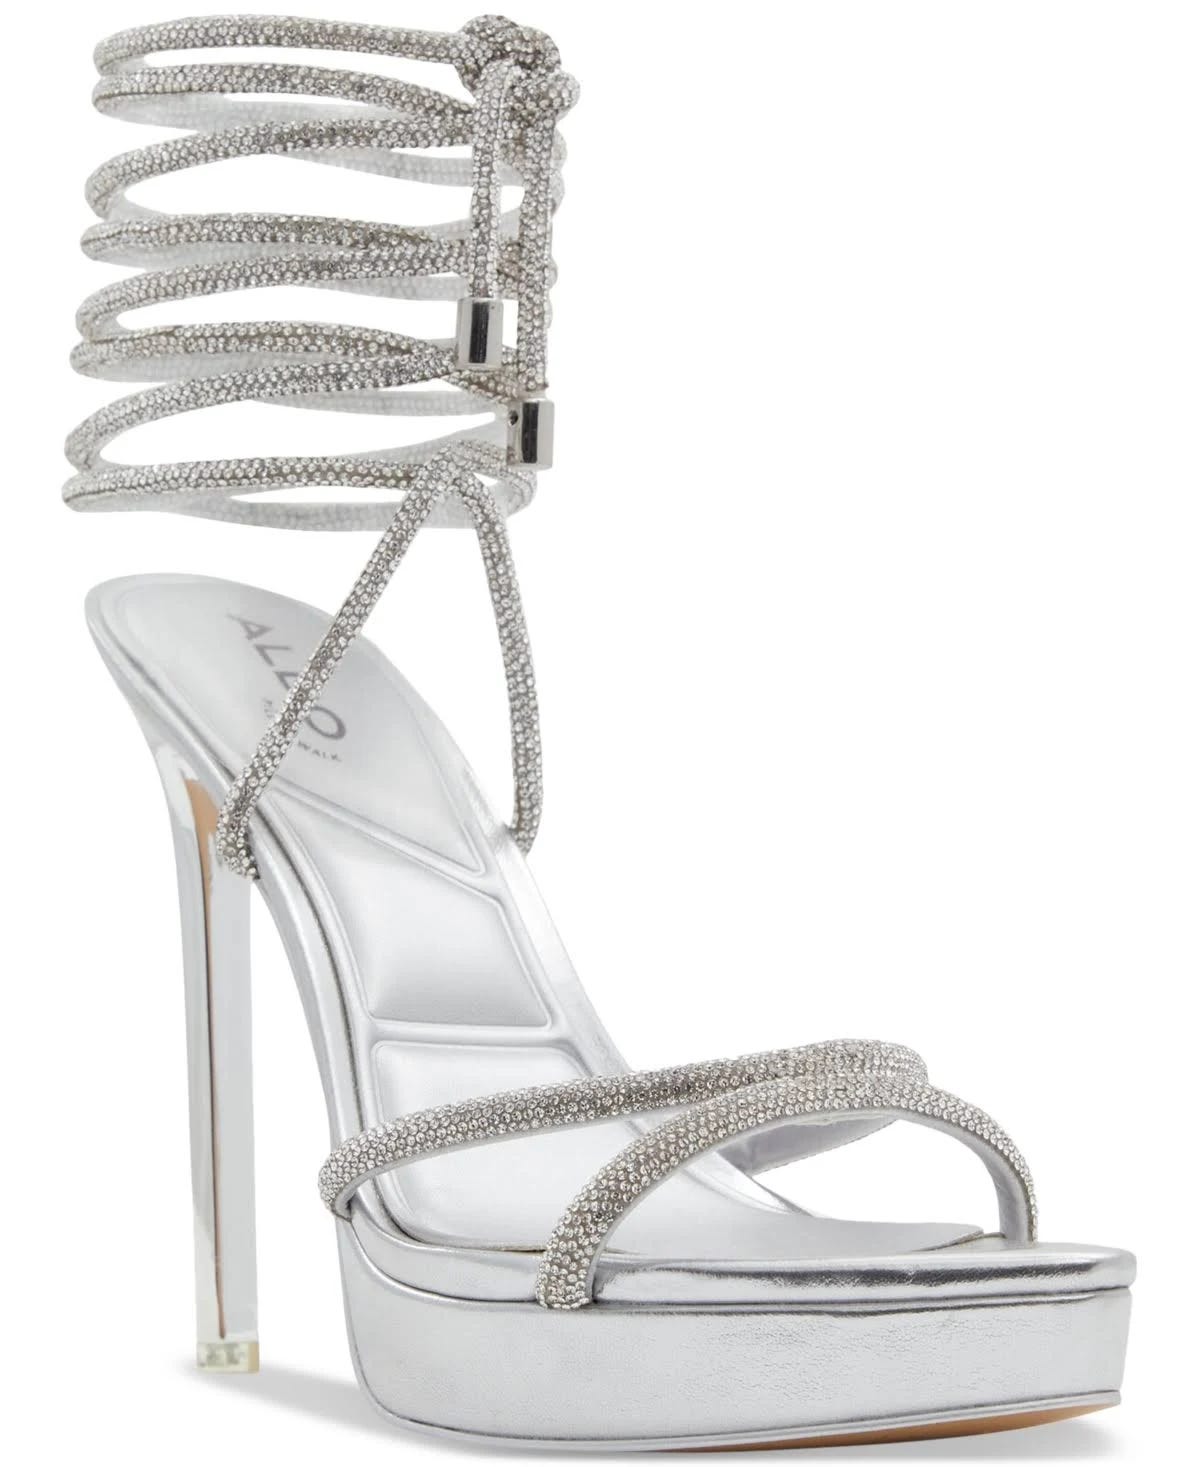 Silver Lace Up Sandals with Rhinestone Accents | Image